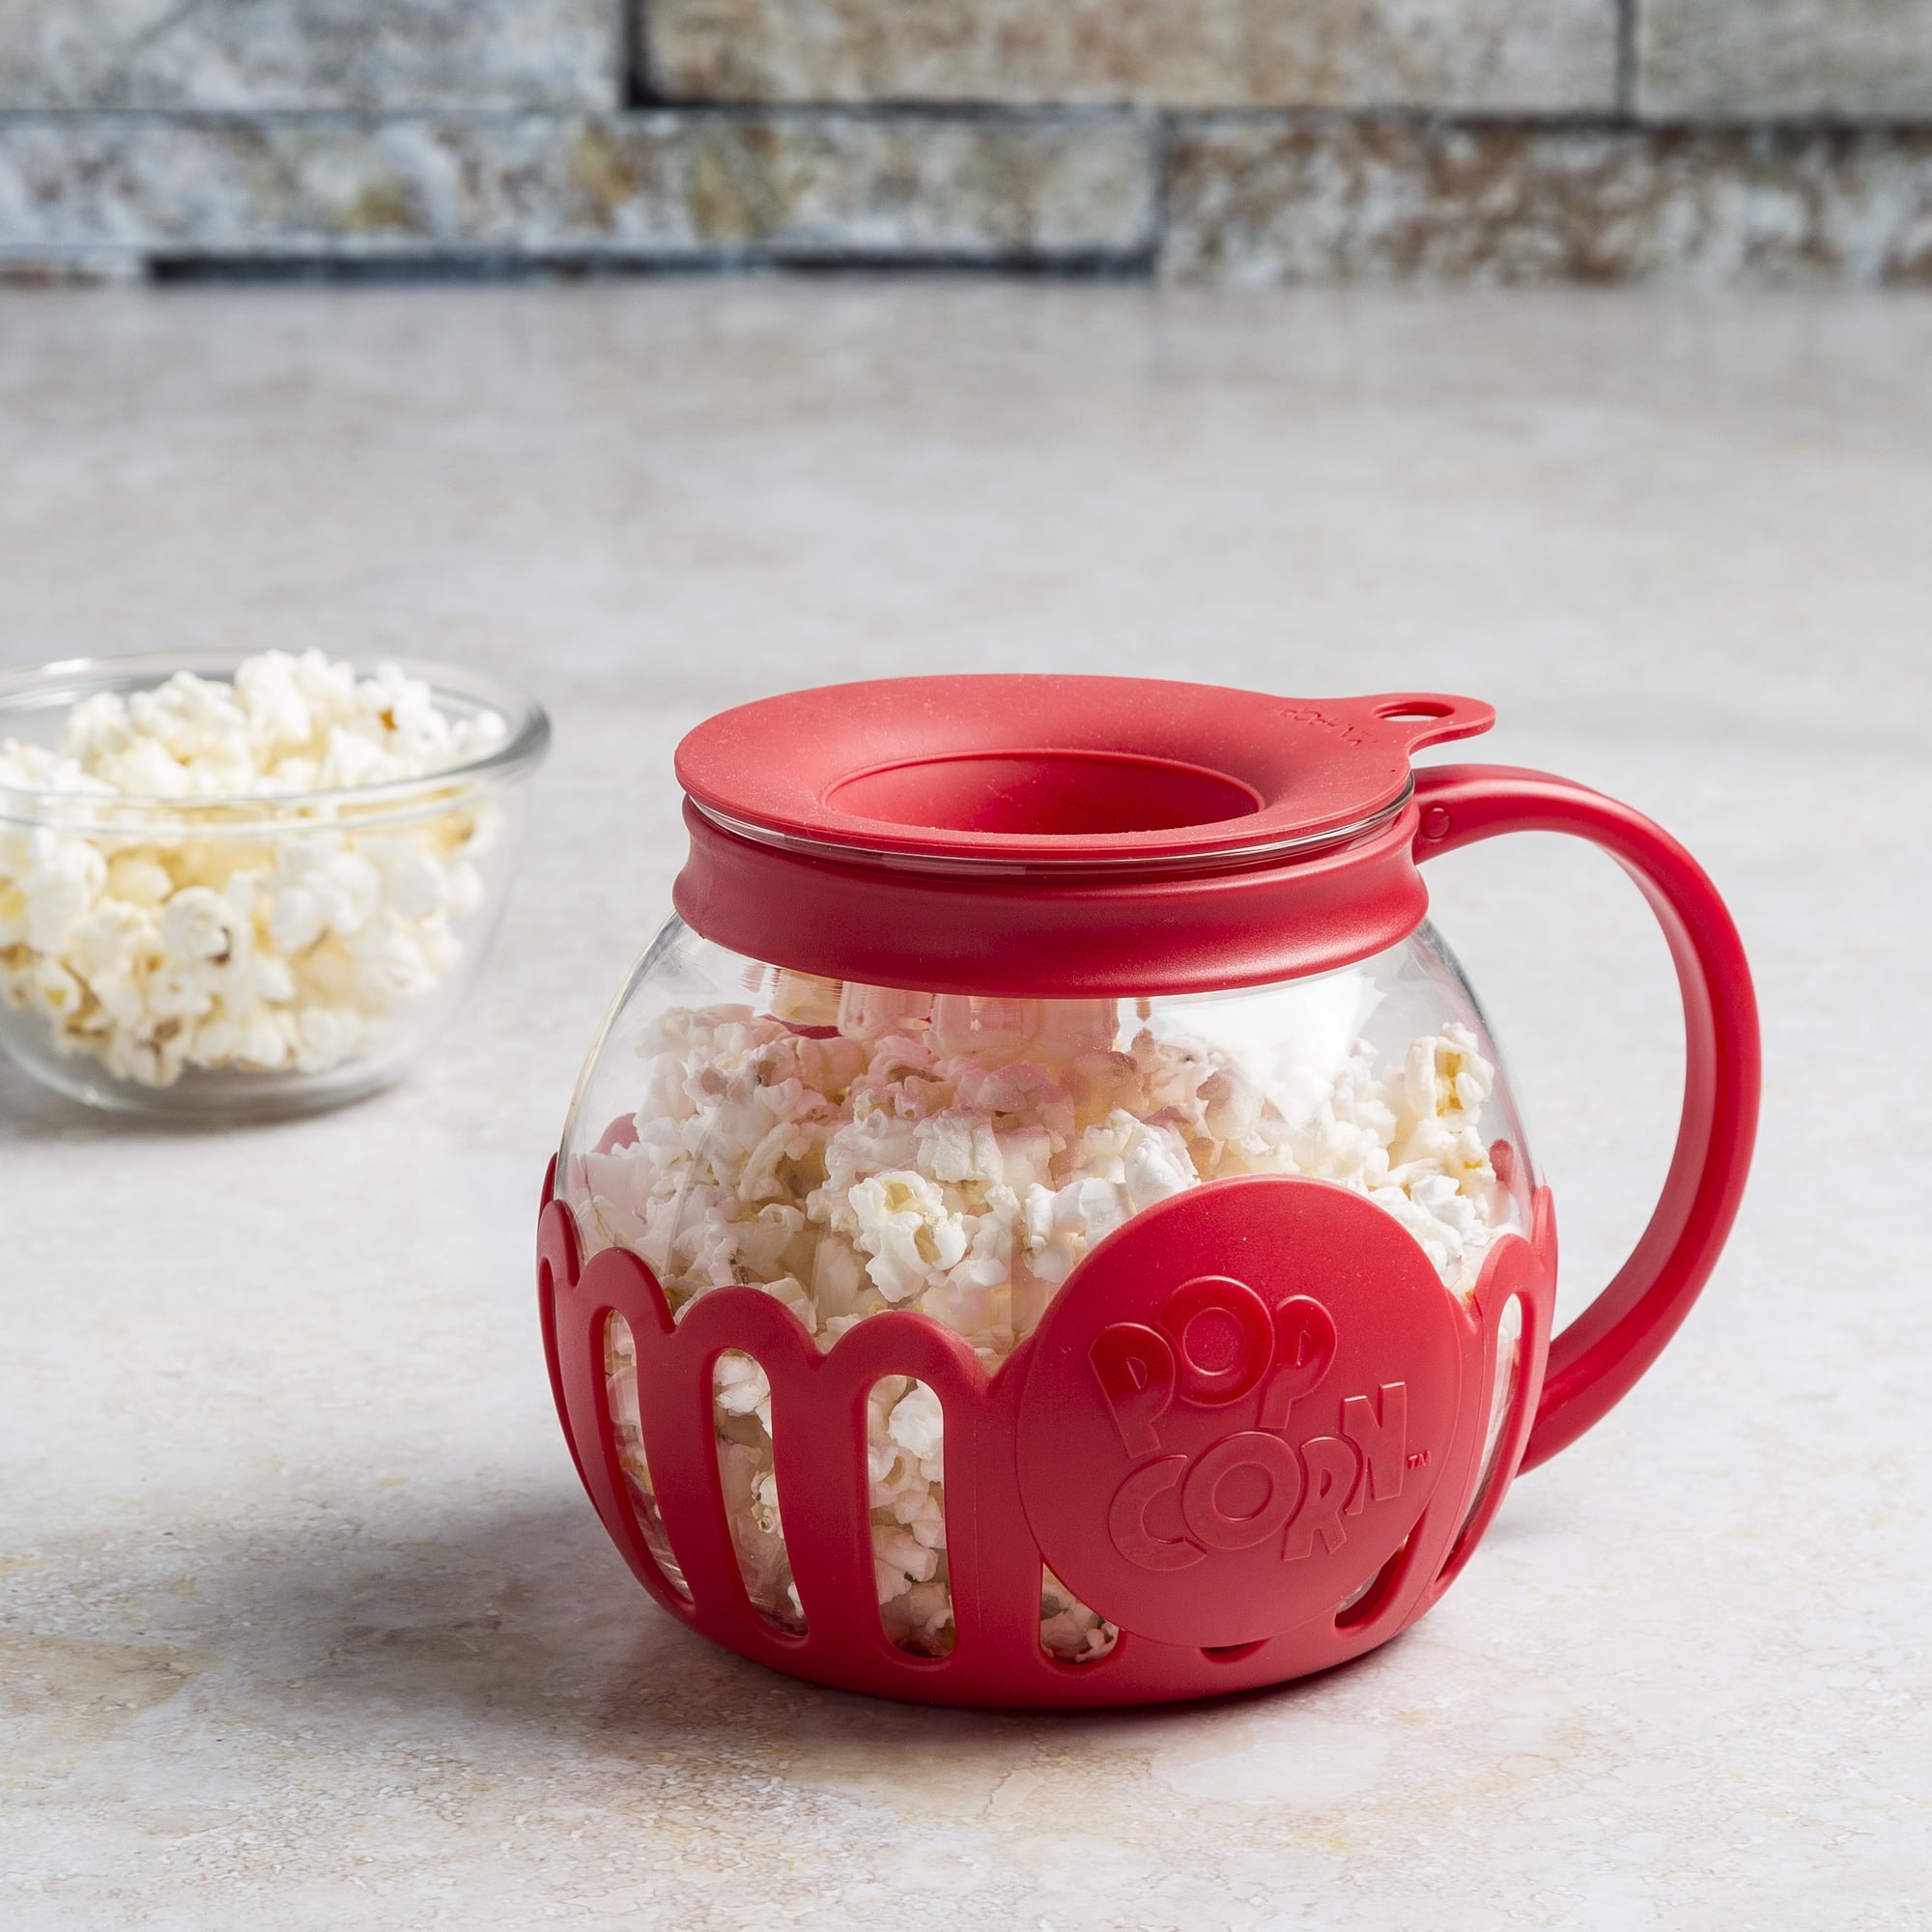 We love our @Tasty popcorn popper! We make popcorn at least 5 times a